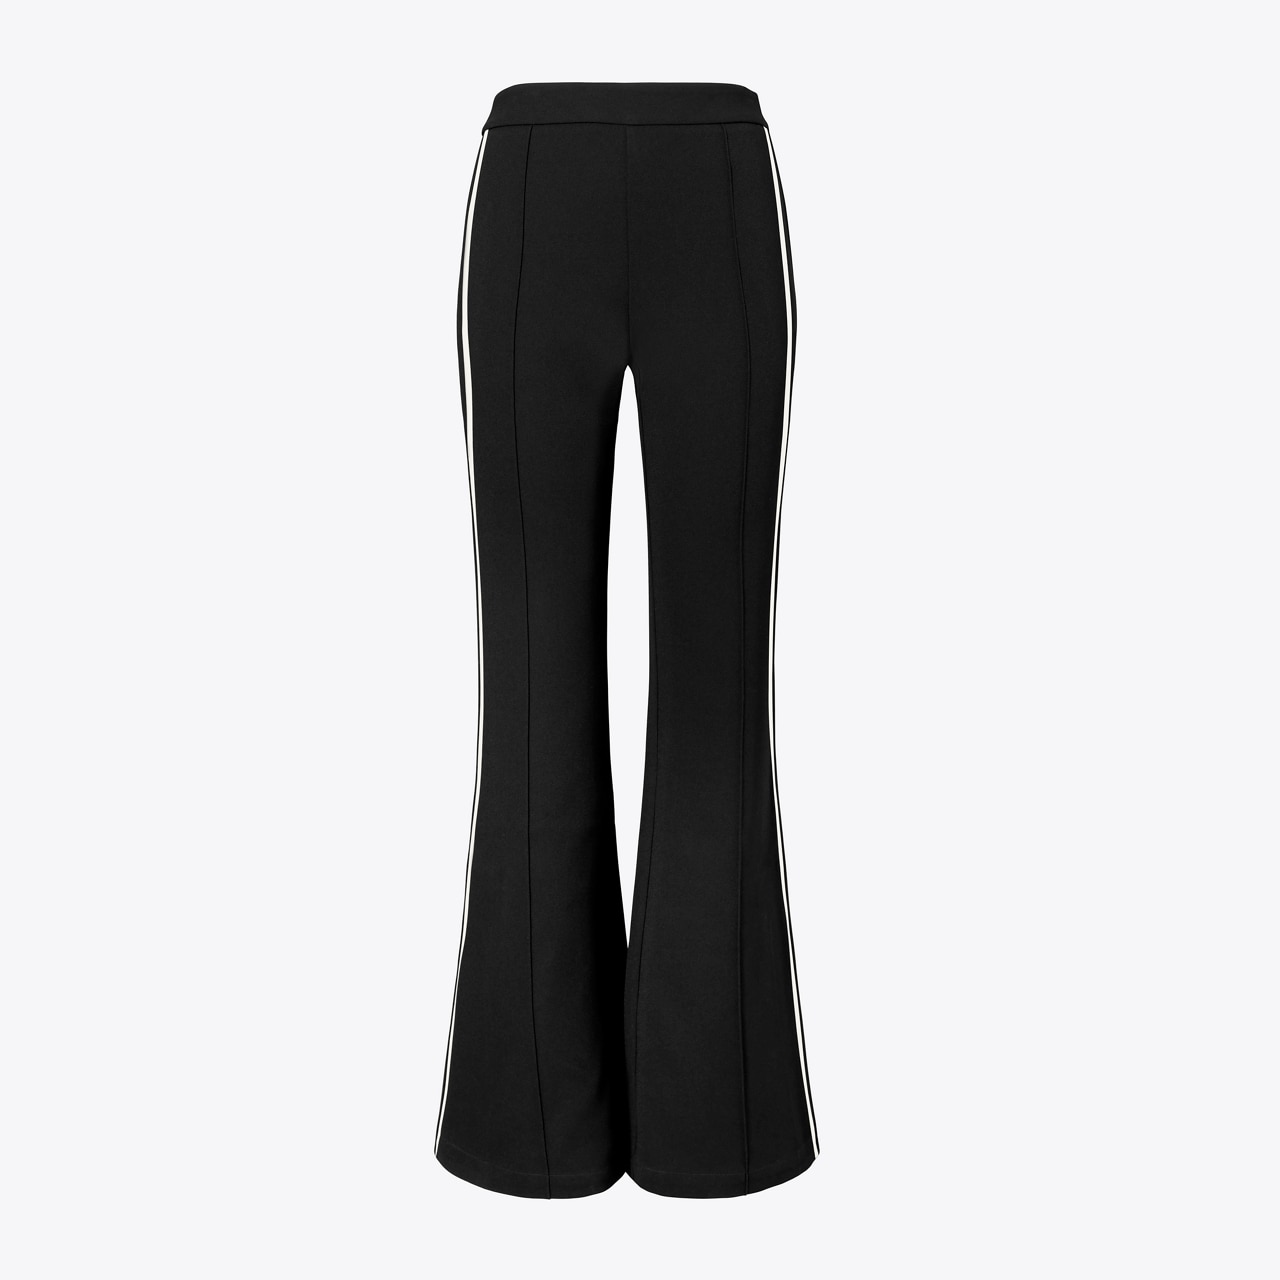 Side-Striped Flared Pant